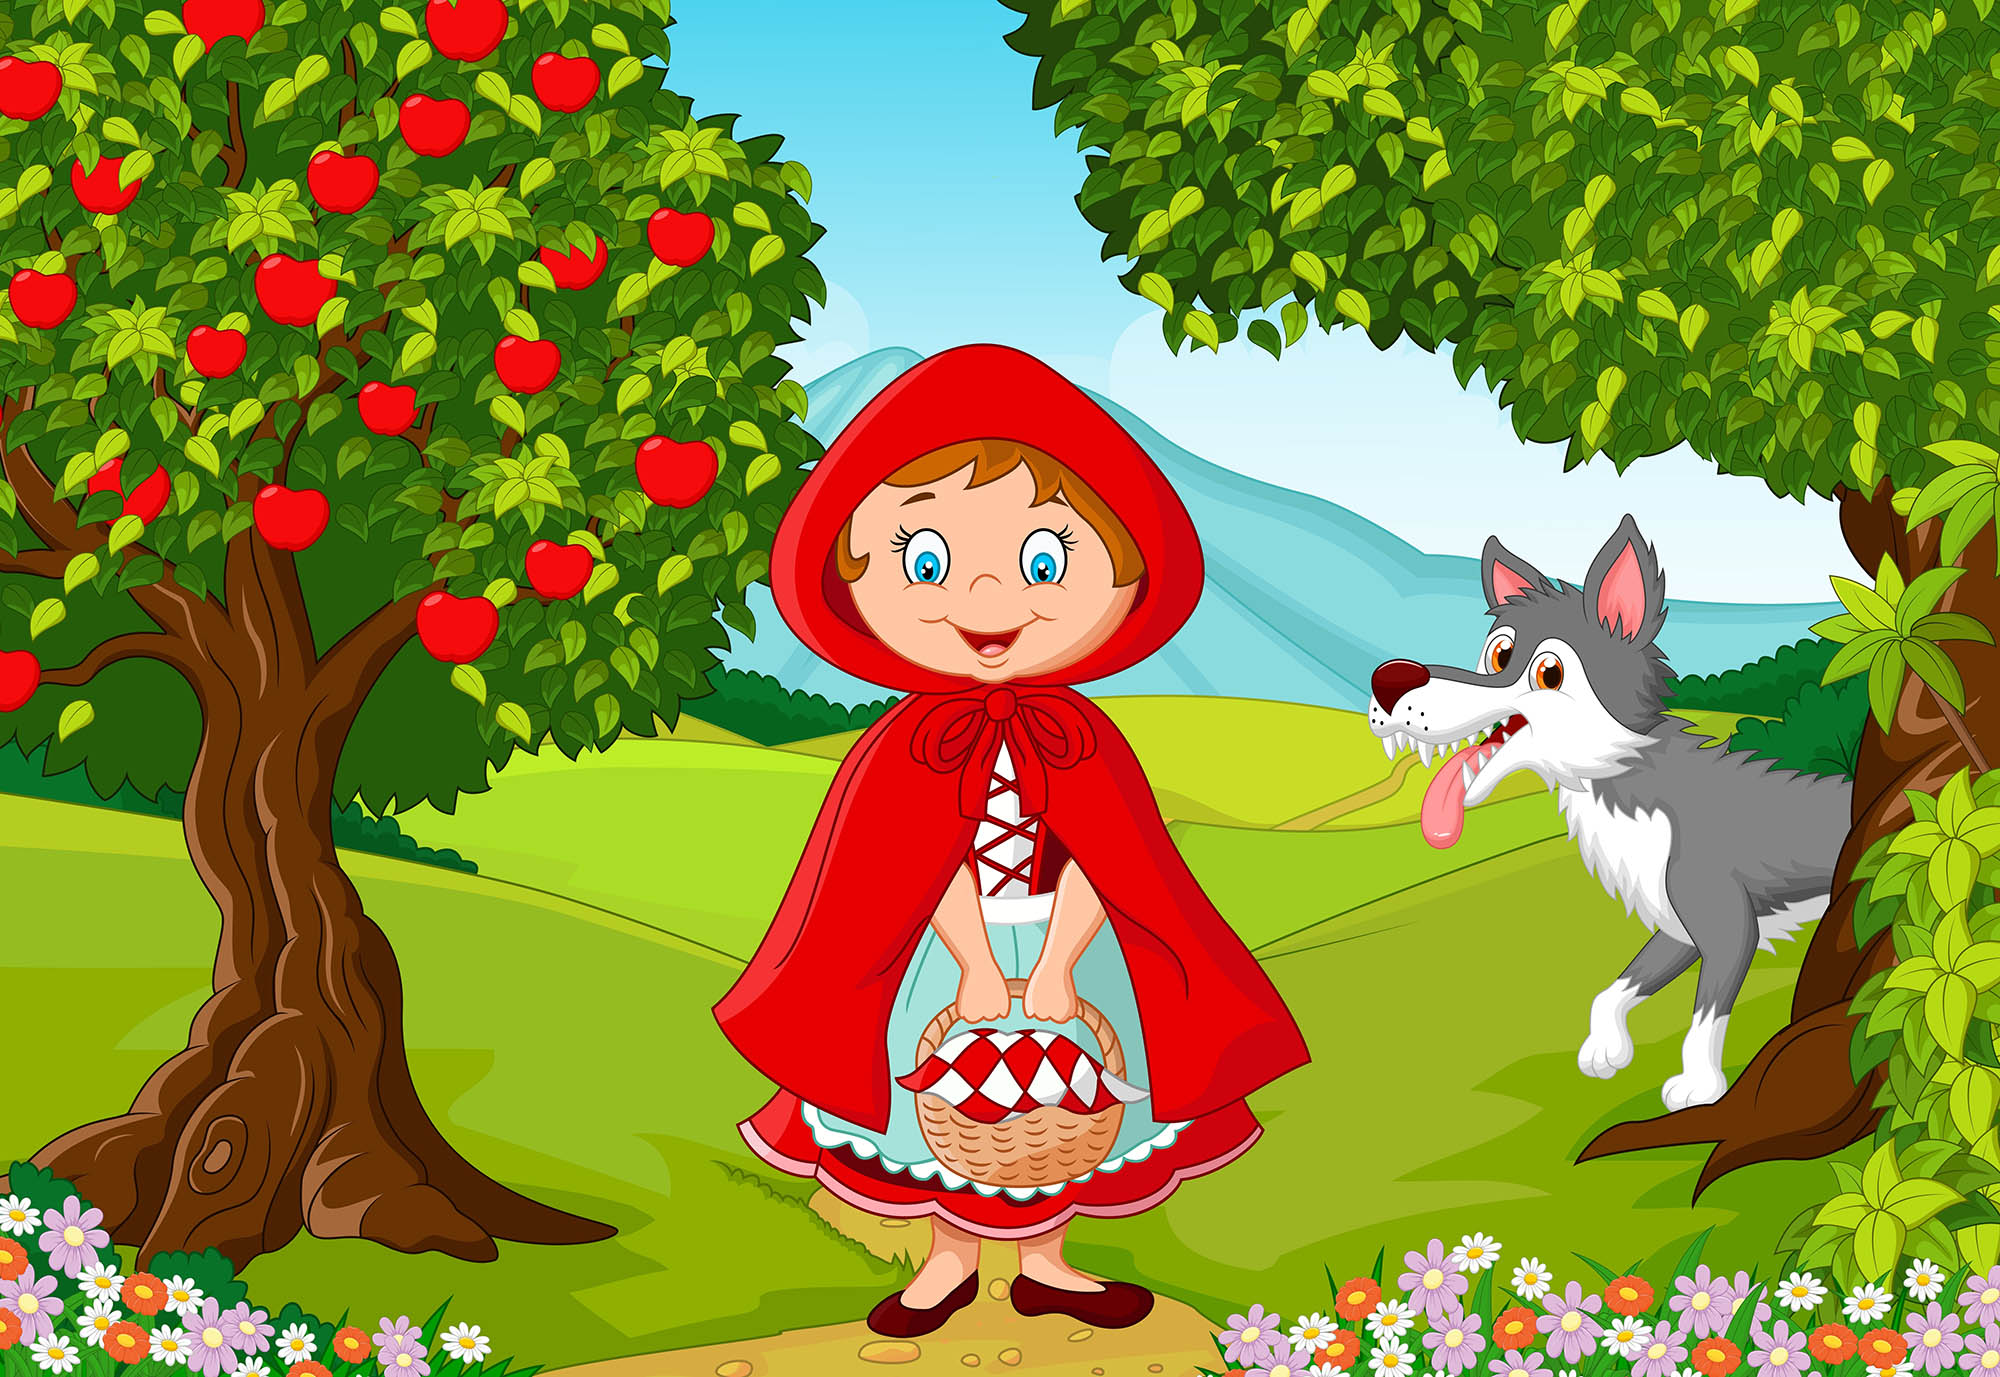 The Story of The Little Red Riding Hood image